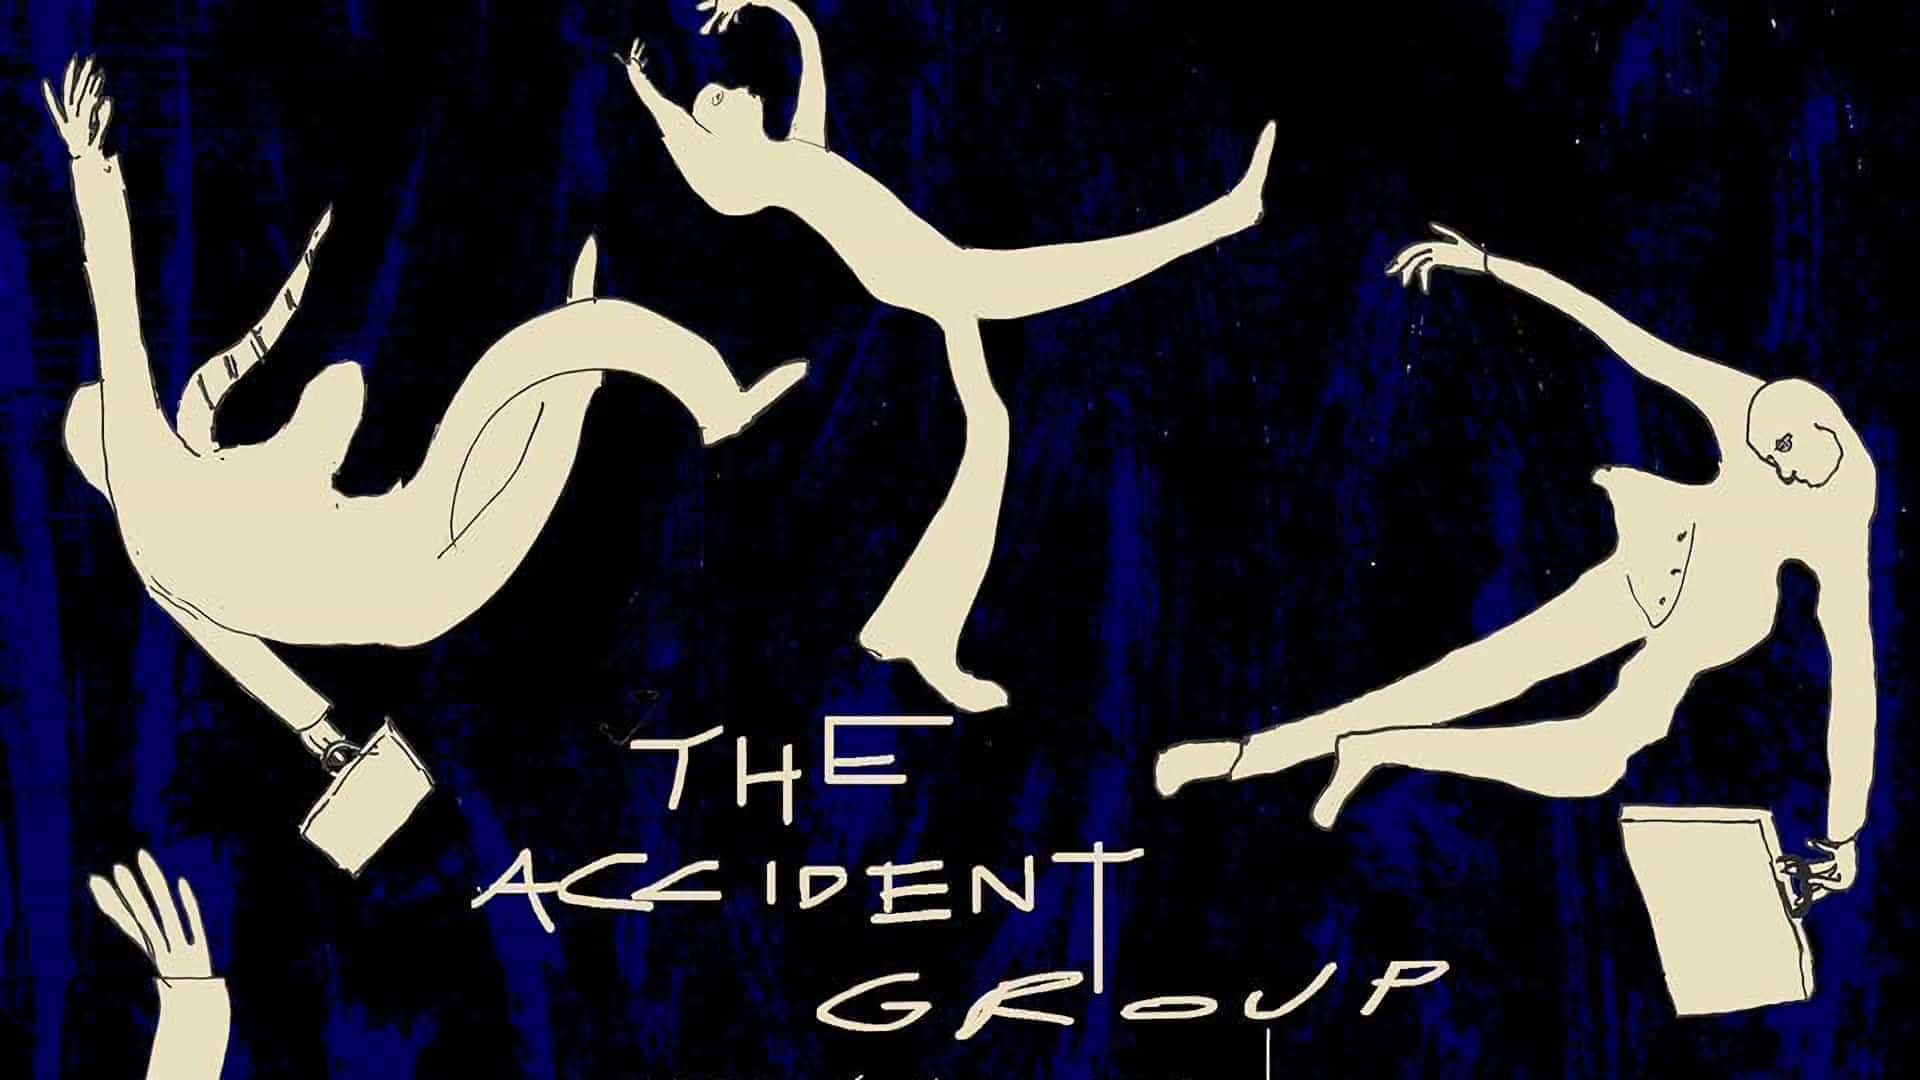 The Accident Group